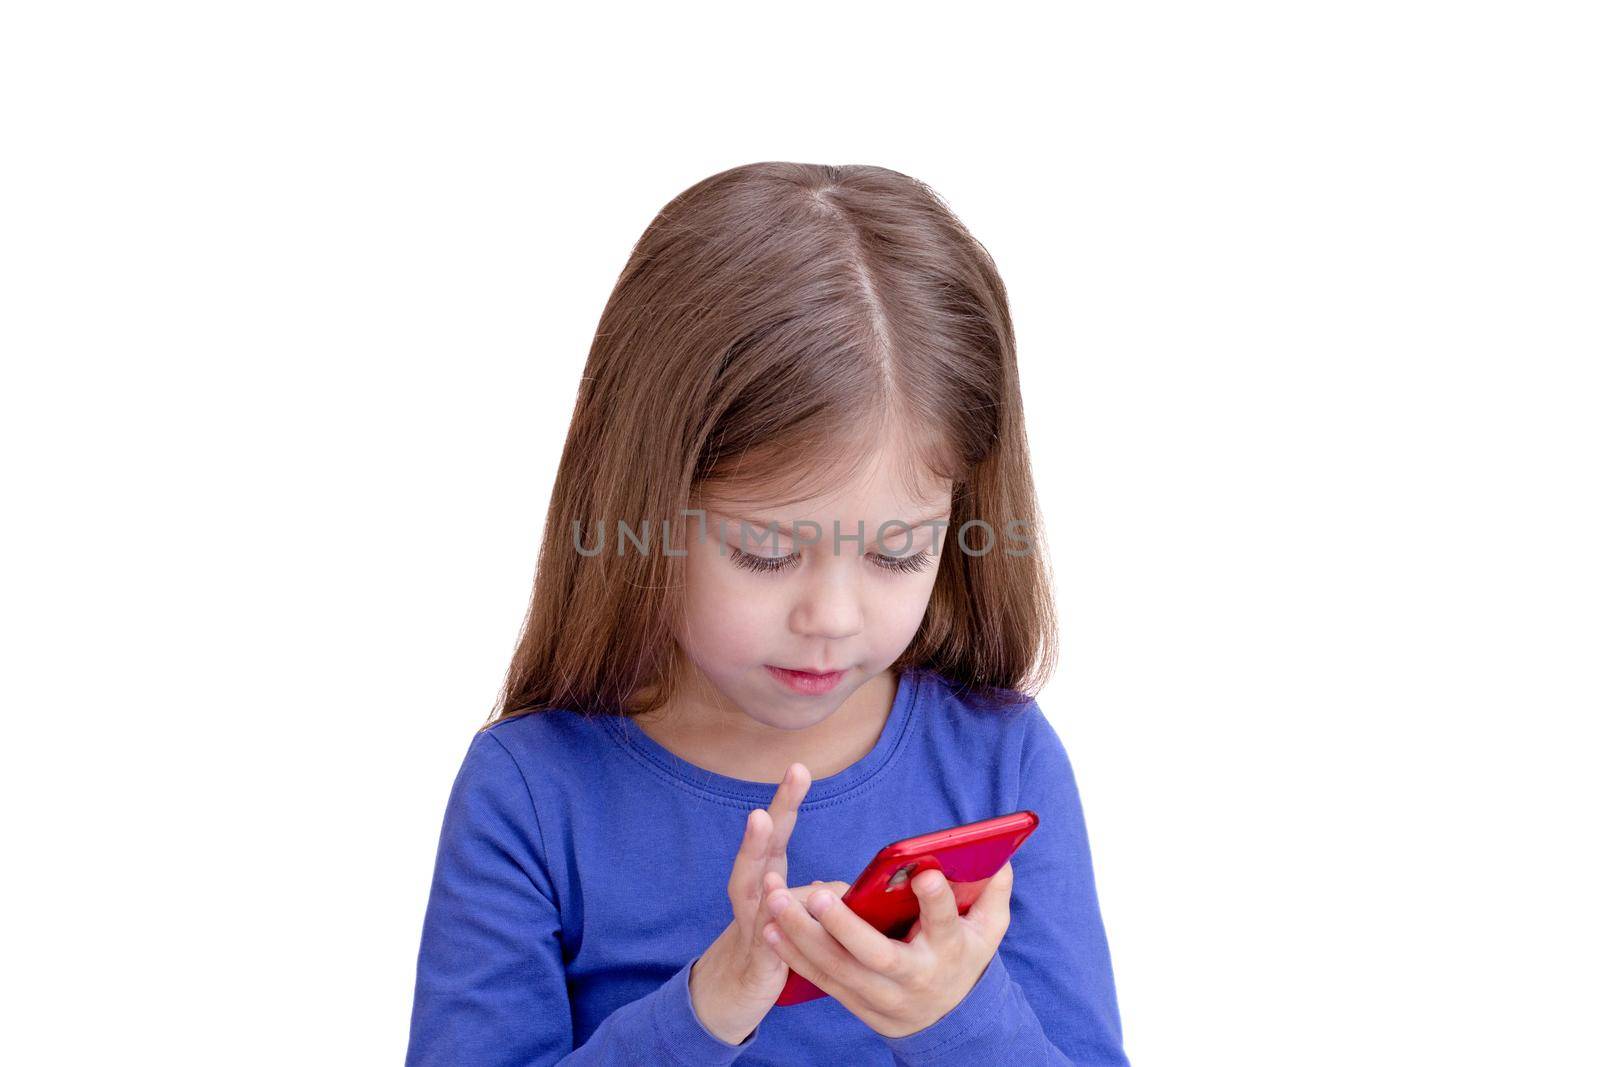 Serious child looking at mobile phone and touching screen by TatianaFoxy